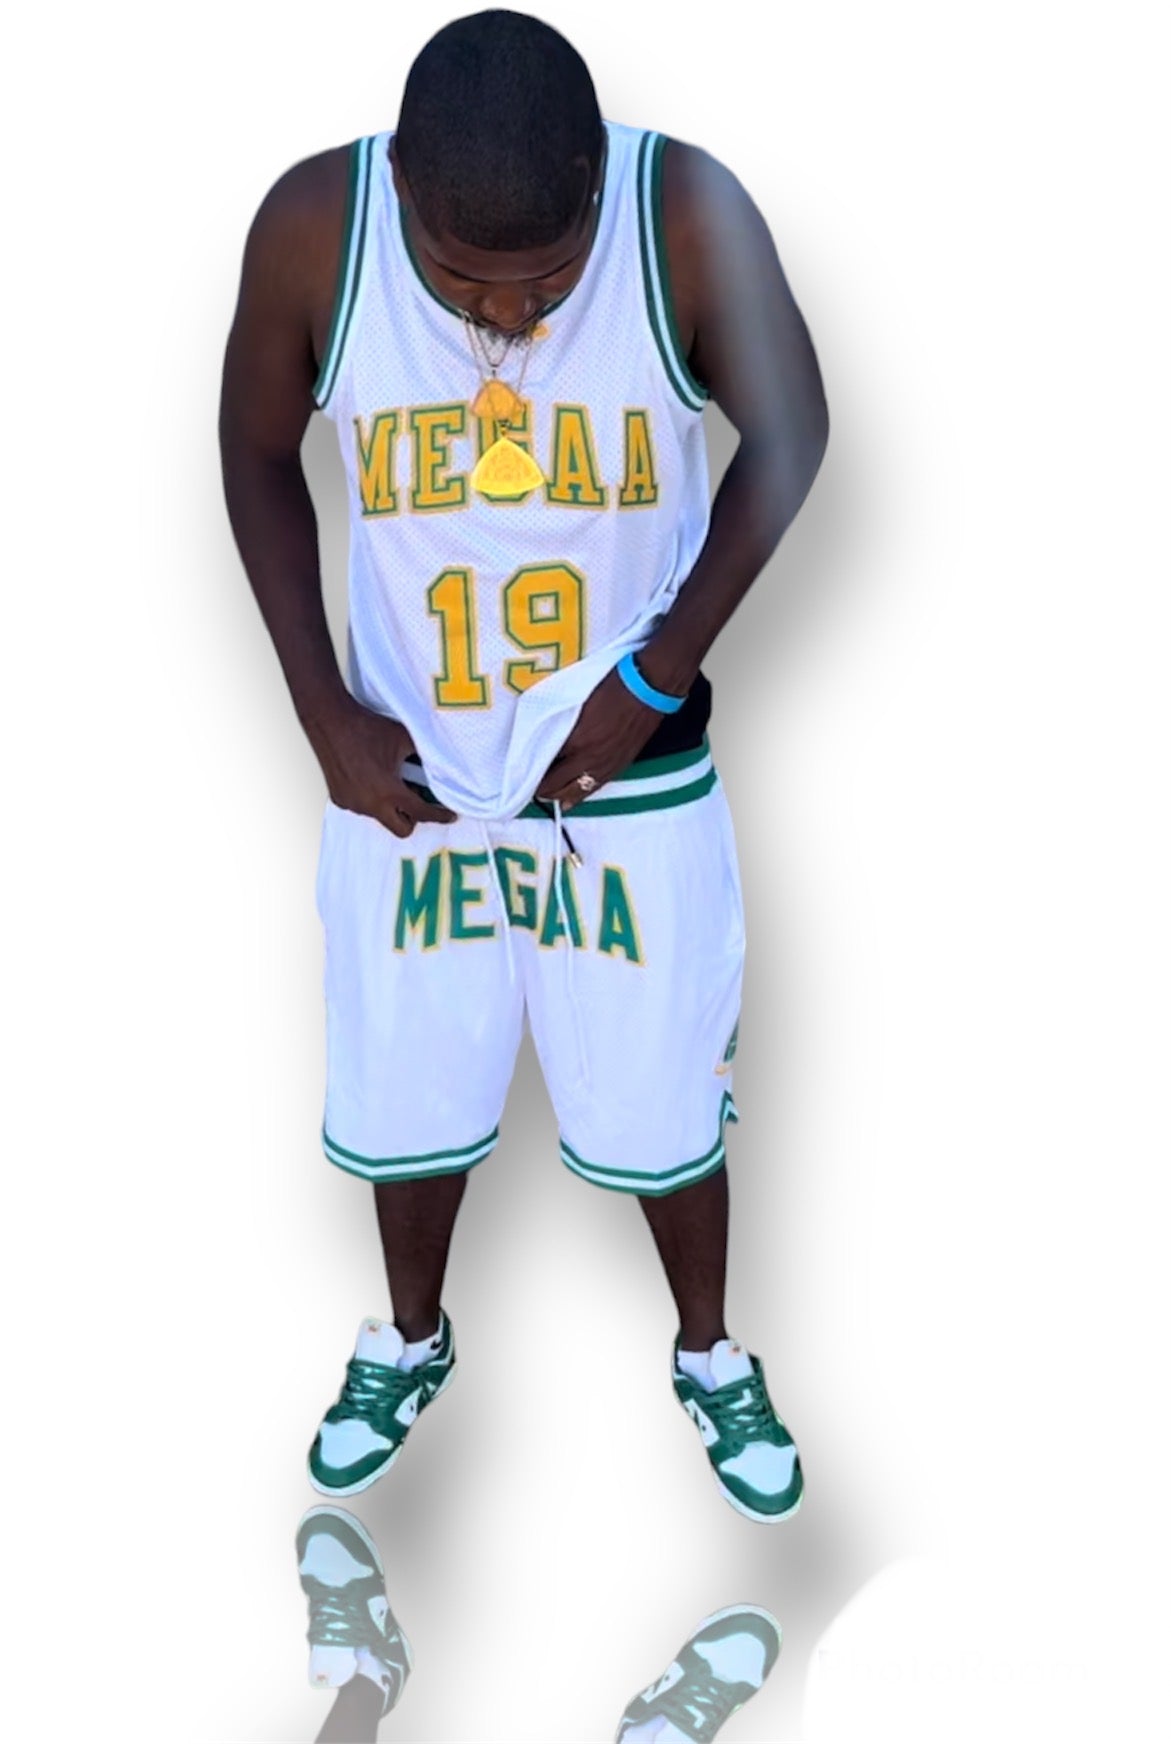 model wearing megaamobilemall supersonic basketball shorts logo on the side & number 19 wearing jersey & shorts with logo pendants